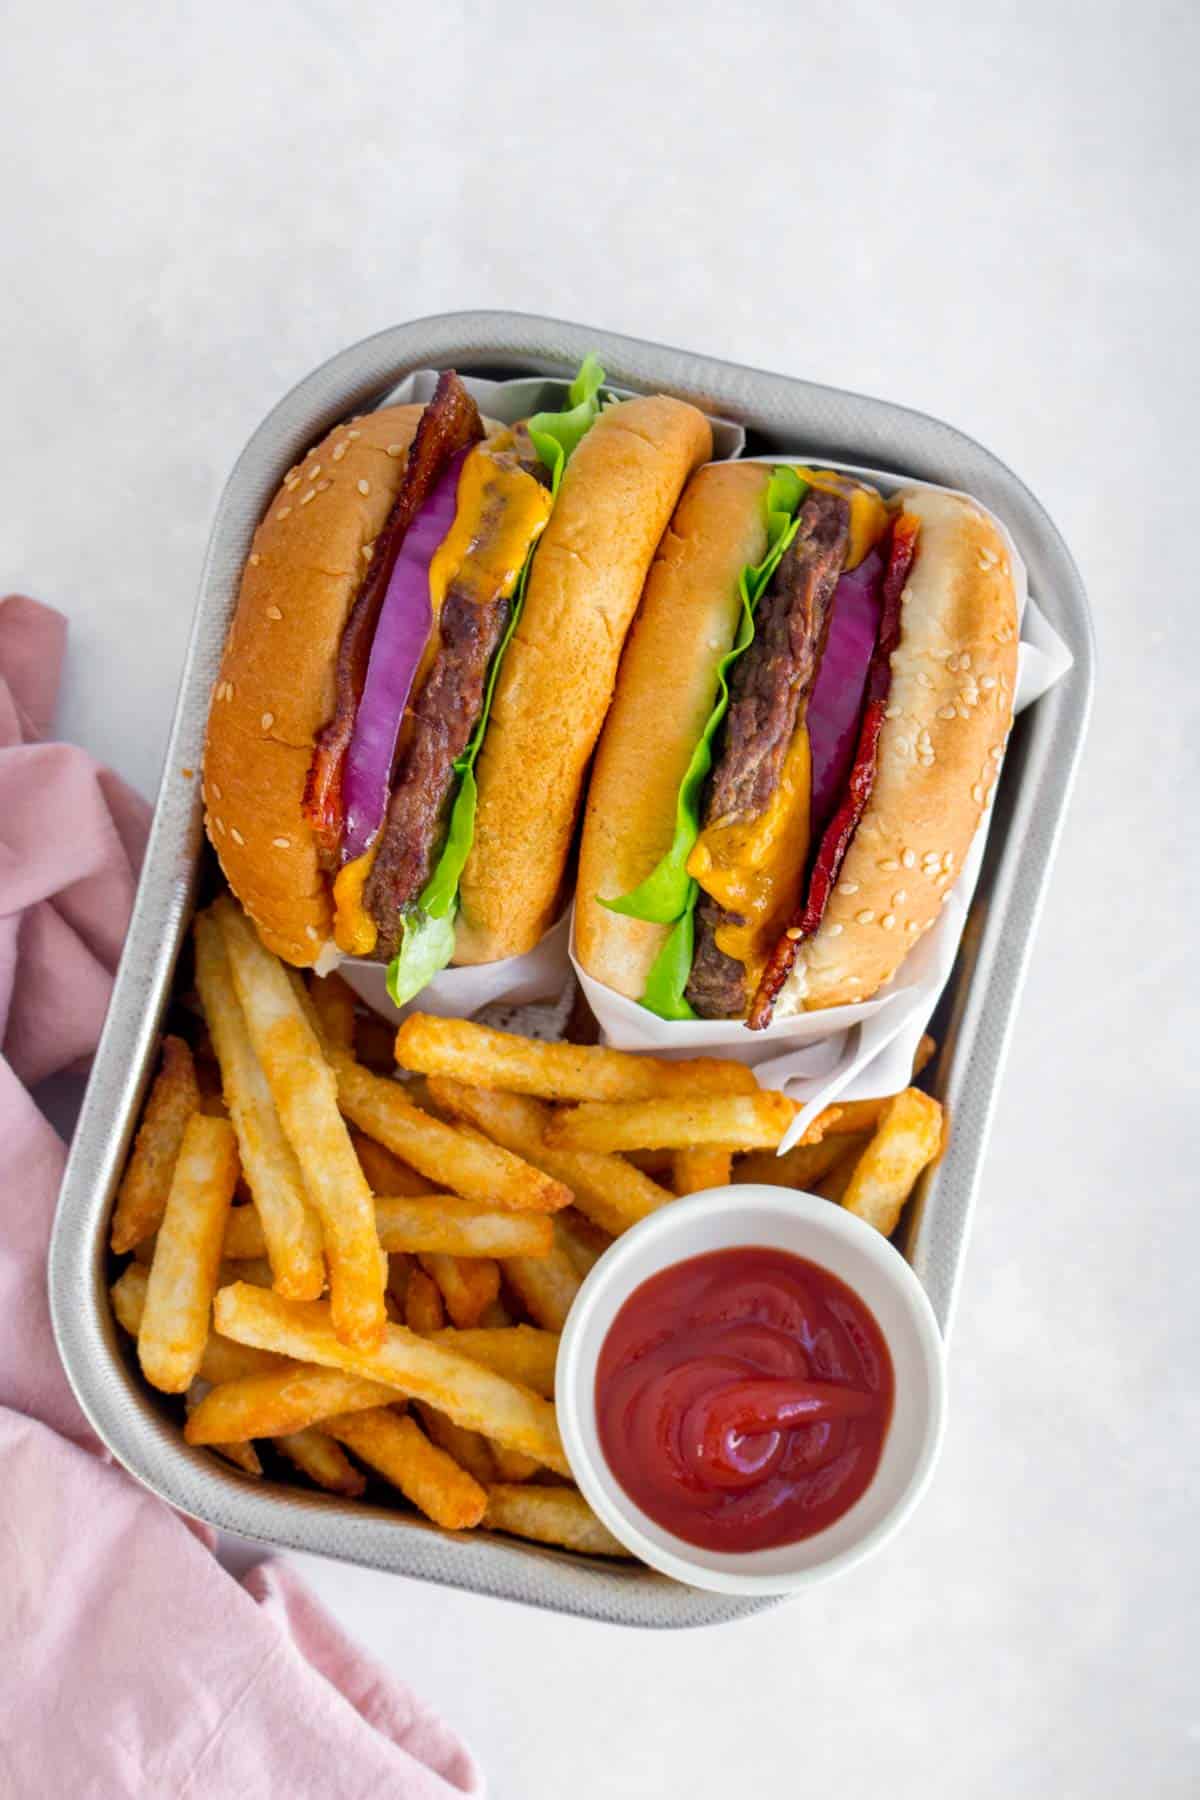 Two air fryer cheeseburgers in a serving tray with fries and ketchup.